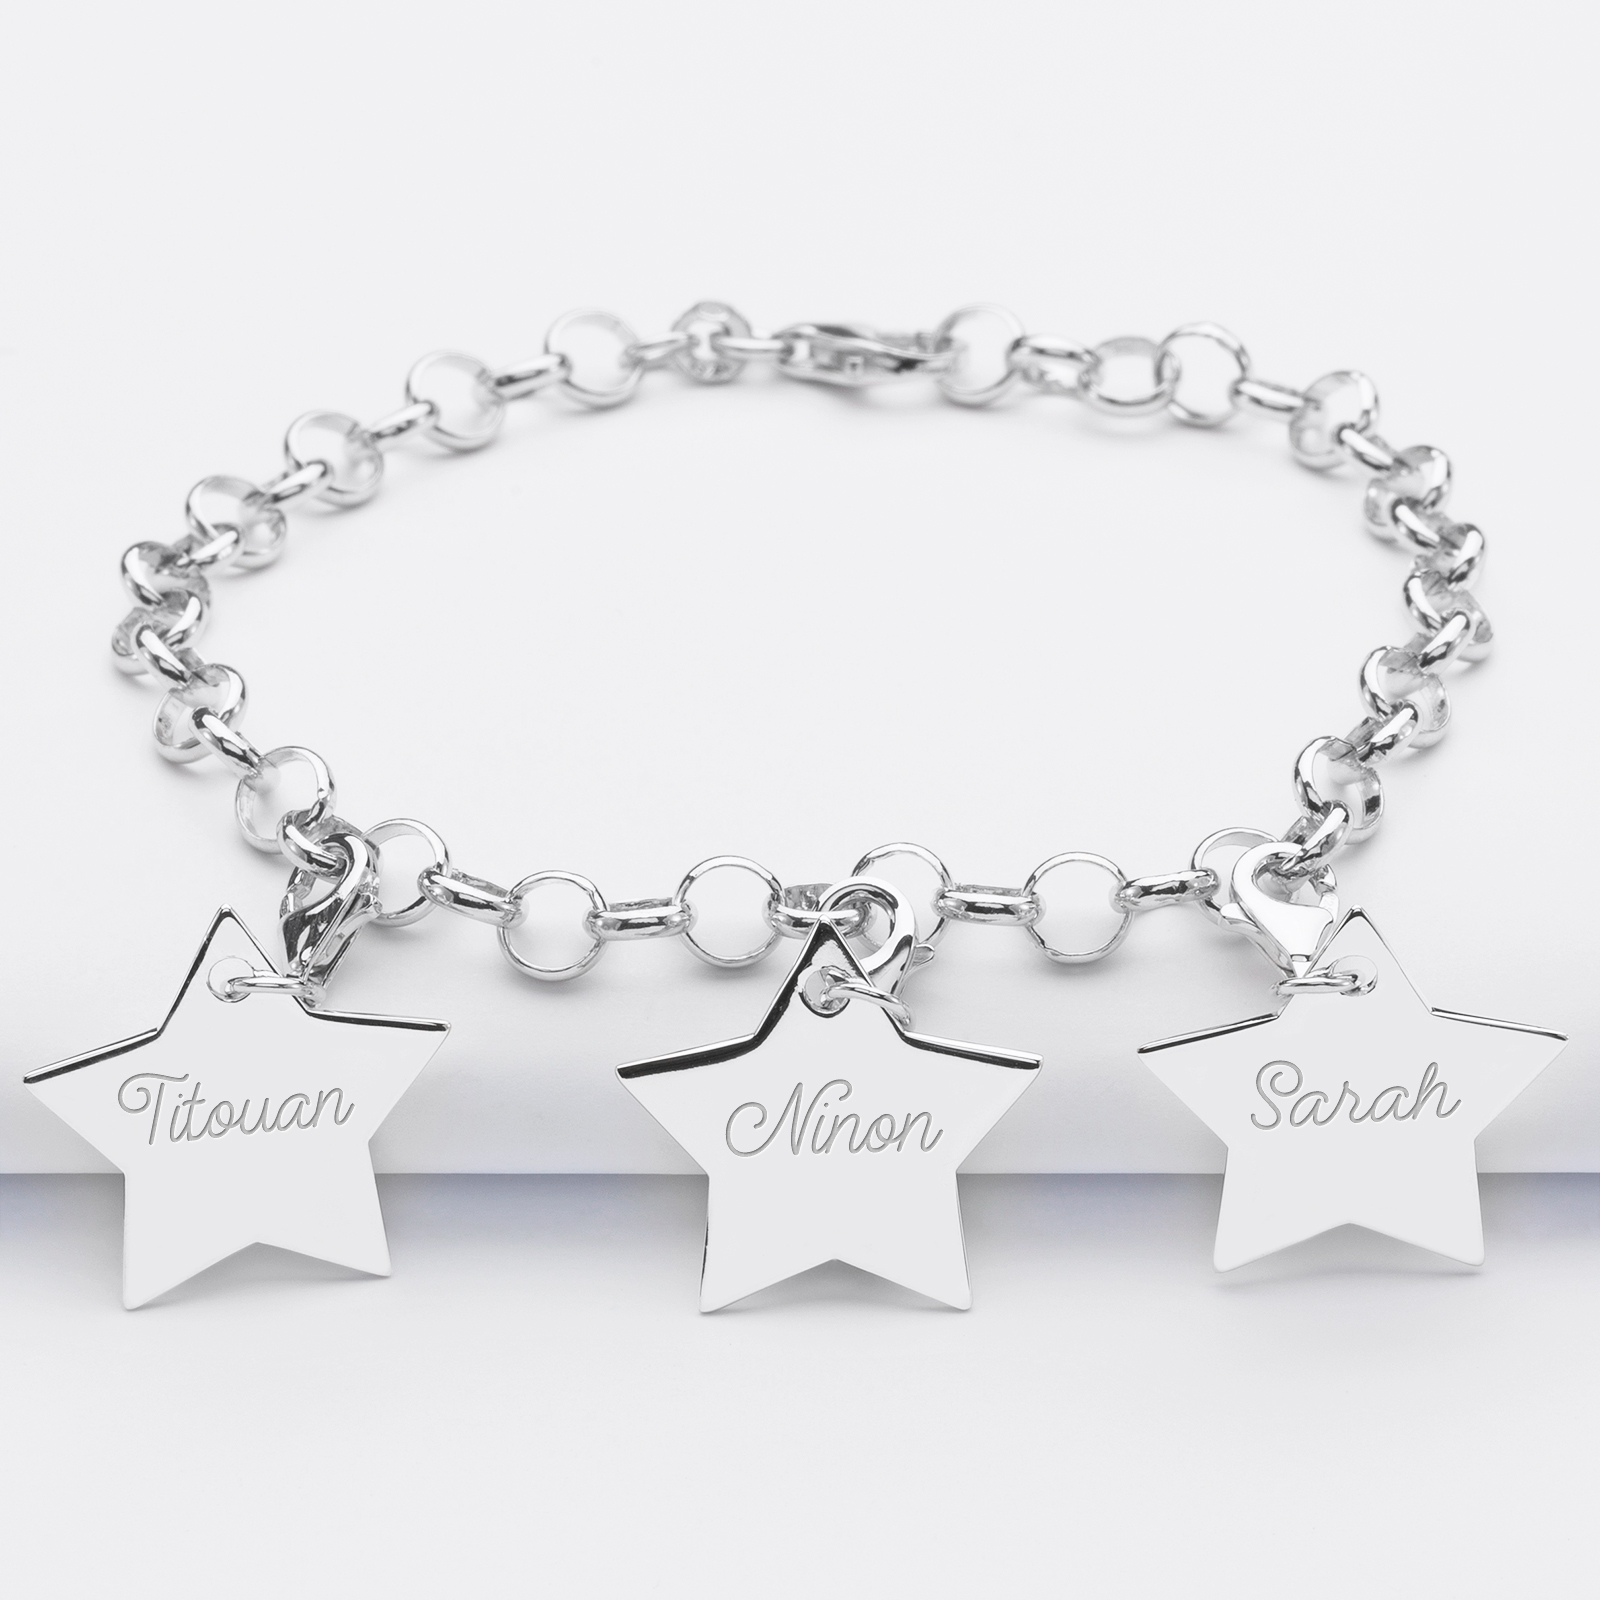 Personalised bracelet with 3 silver engraved star charms 20x14mm - names